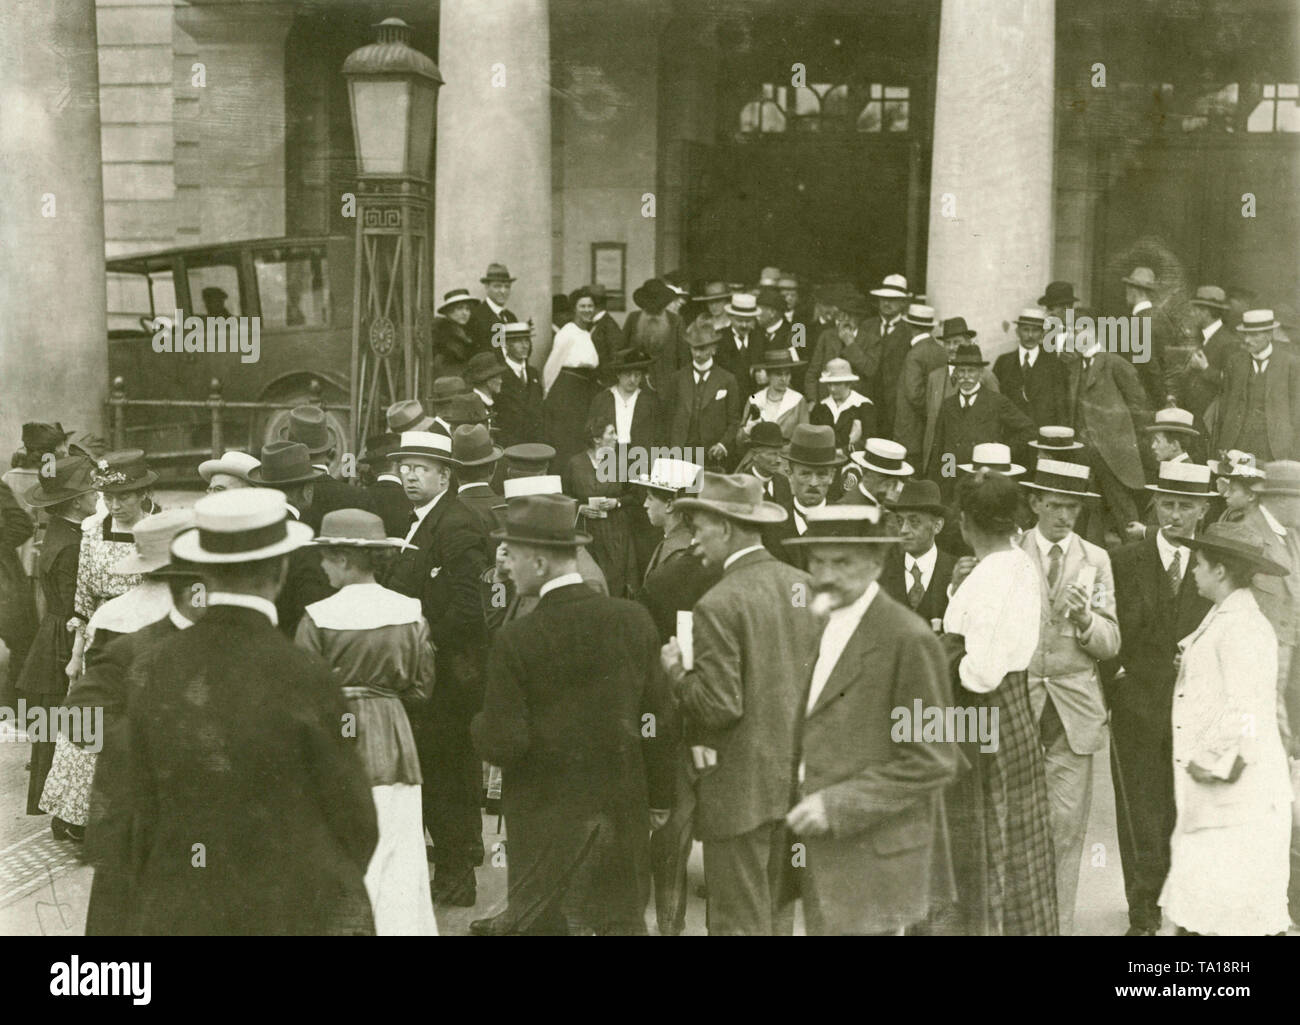 Prime Minister Philipp Heinrich Scheidemann speaks against the adoption of the Treaty of Versailles in a protest meeting in front of the National Assembly. This photograph shows onlookers who wait for the end of the session of the National Assembly. Stock Photo